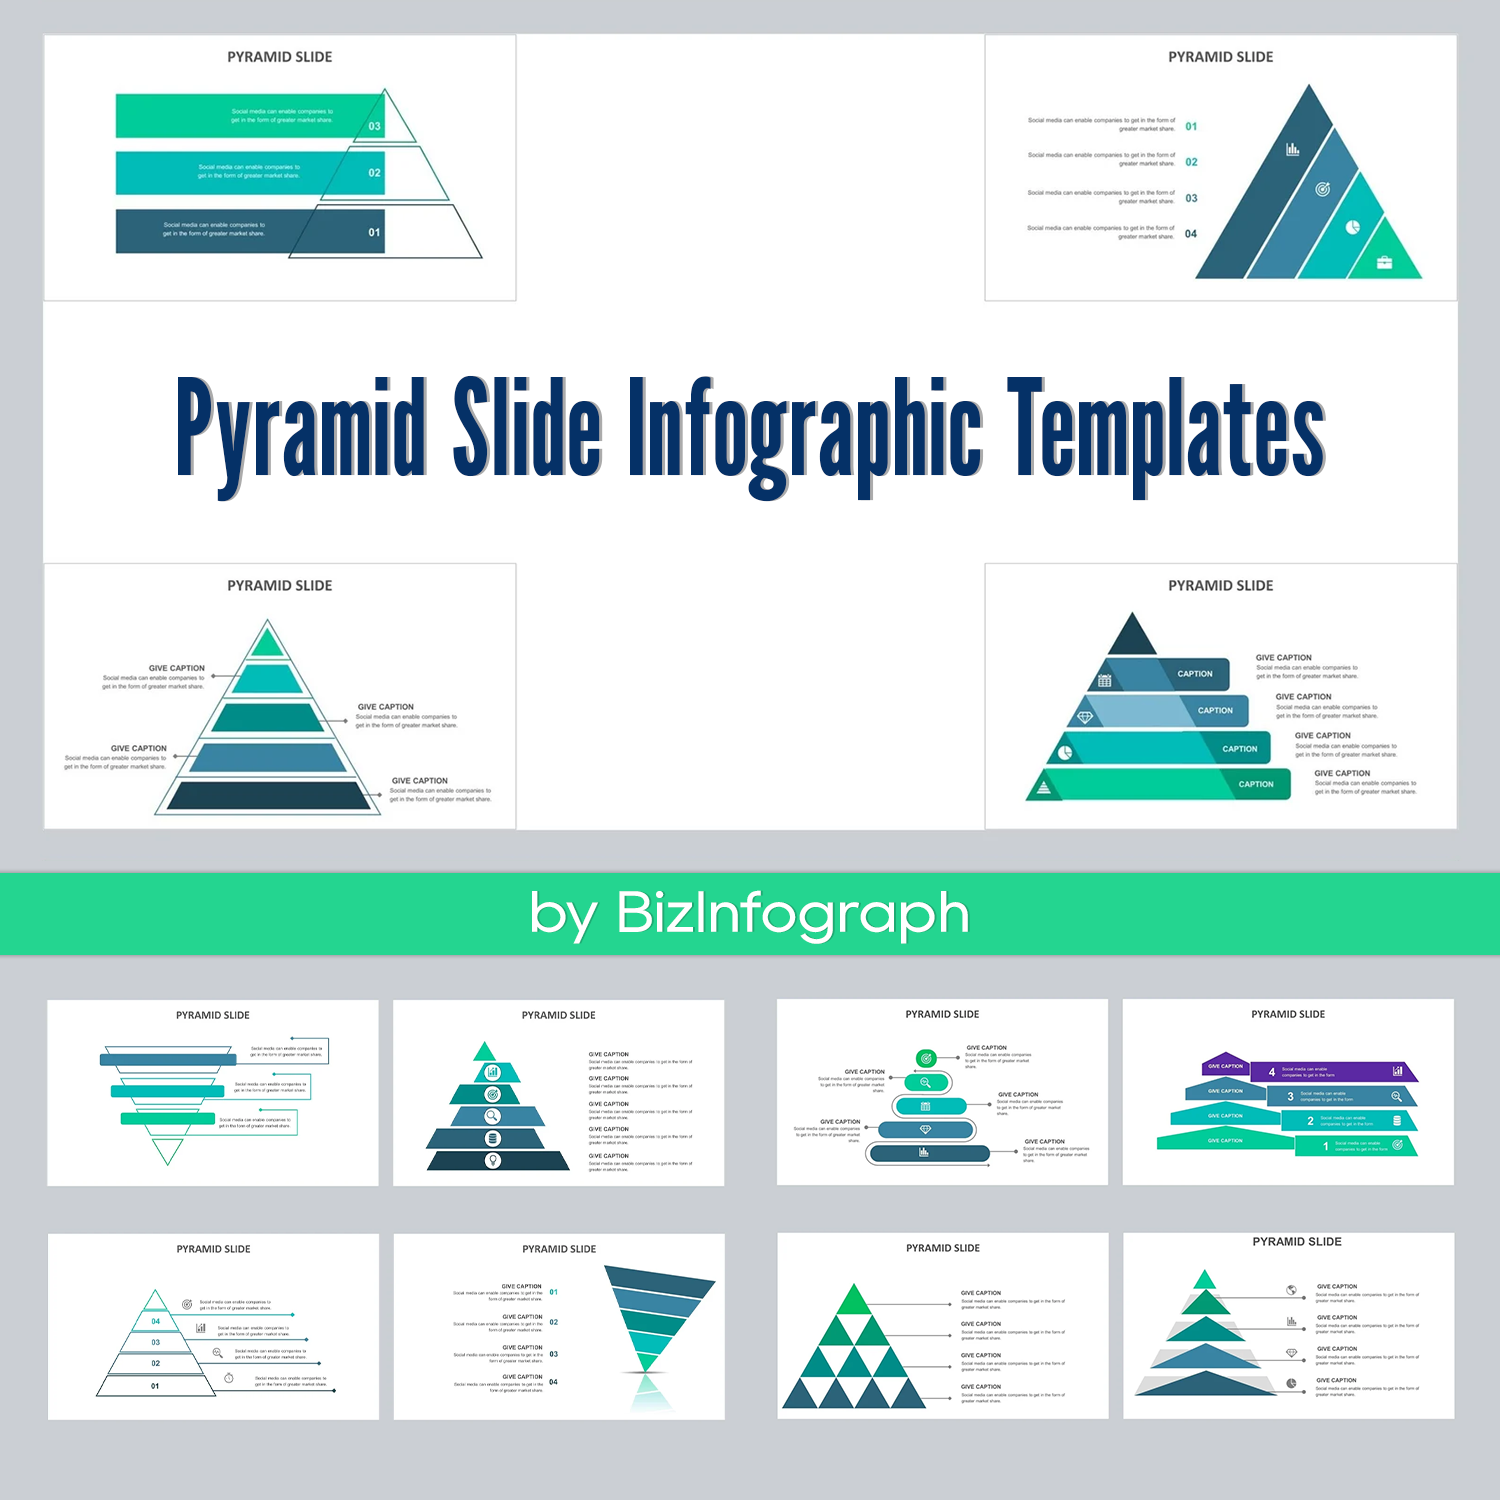 Pyramid Slide Infographic Templates cover.